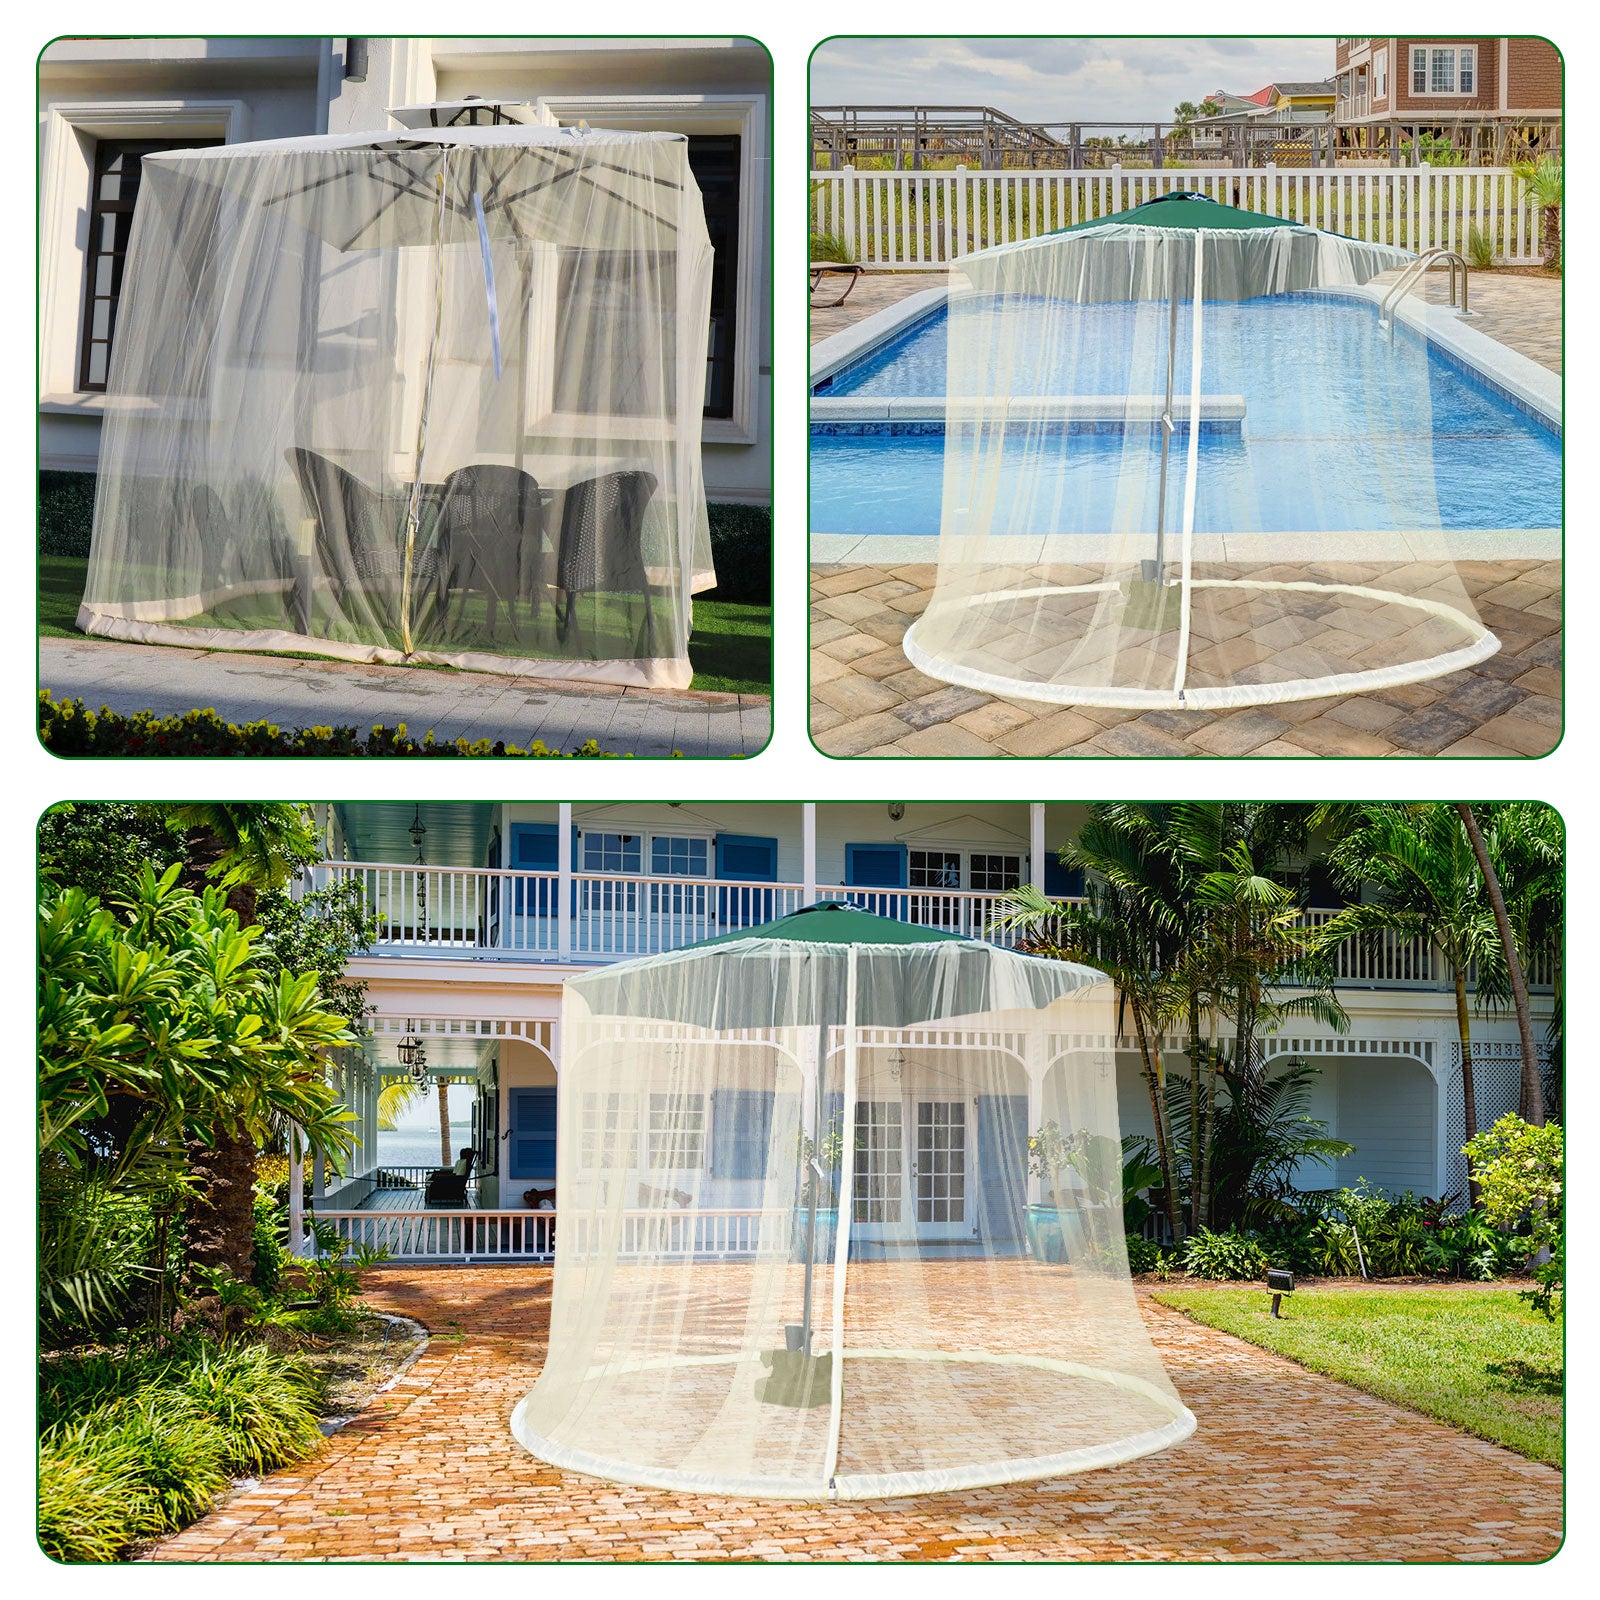 Mosquito Net Cover for Parasol, Insect Parasol Cover for Outdoor, Screen Cover for Yard Umbrella with Zippered Mesh